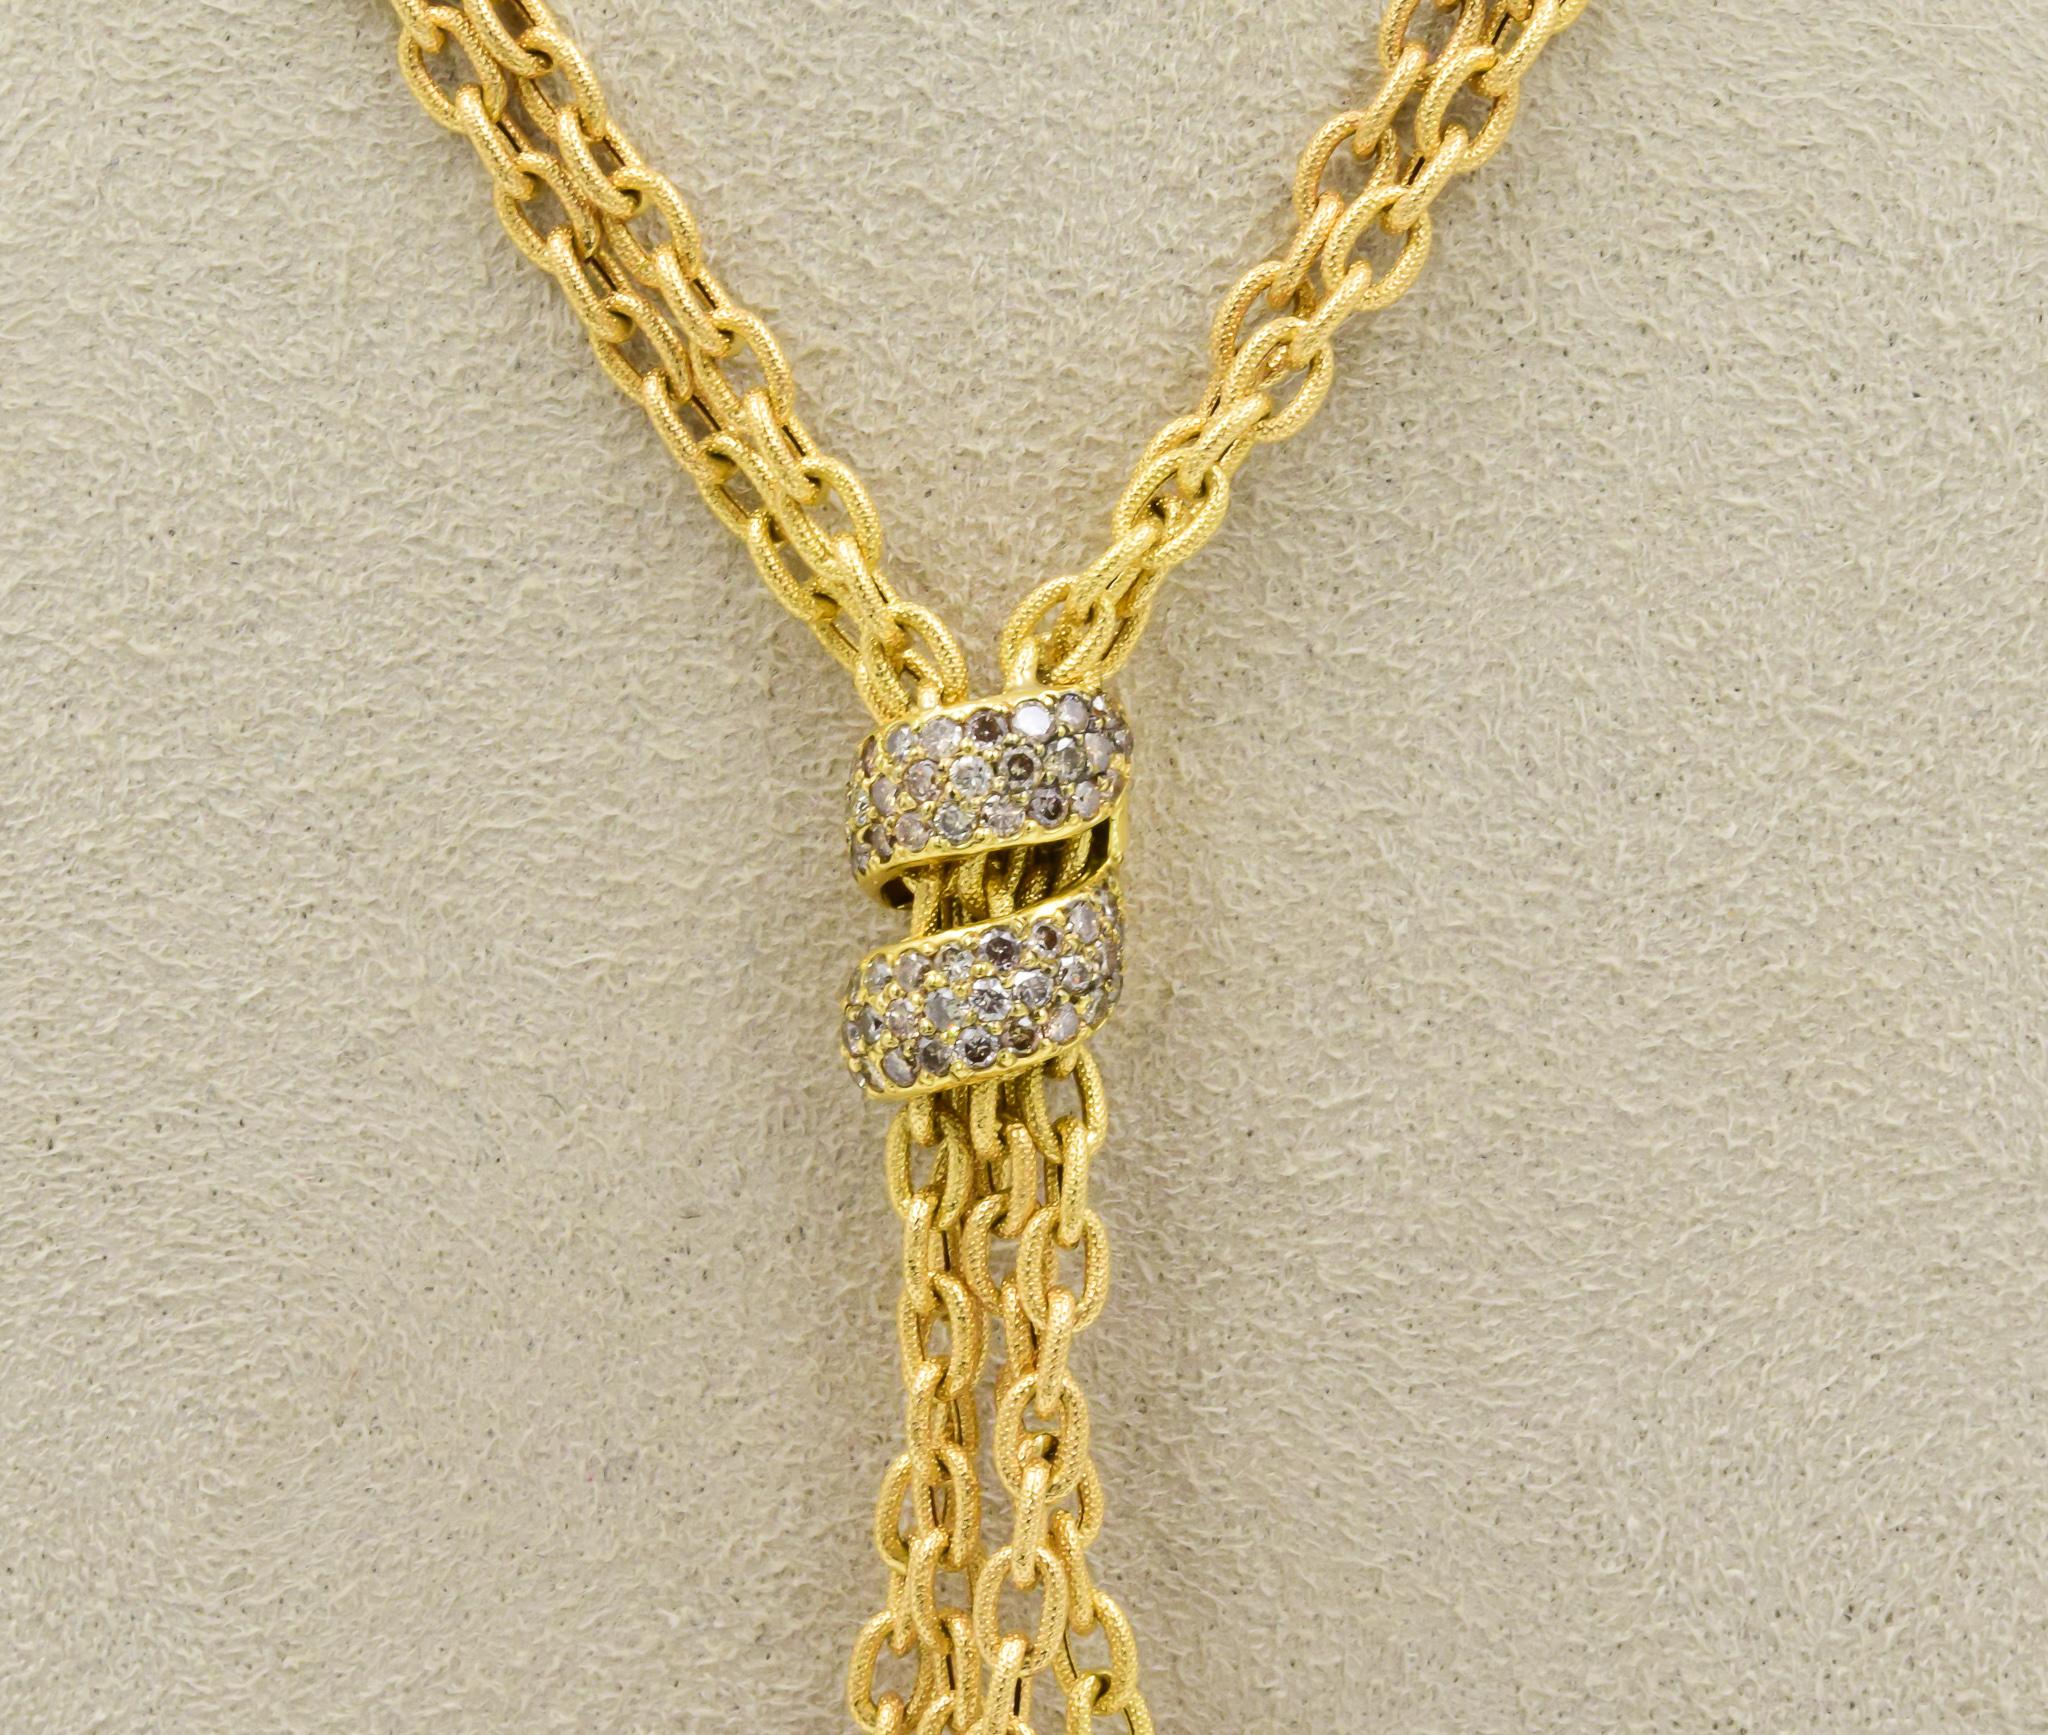 This beautiful Yvel necklace has recently been traded in.  The link style chain has a double-strand design with milgraine oval links.  The necklace has an adjustable length with a fine lobster clasp.  The pearls are set underneath a loop of